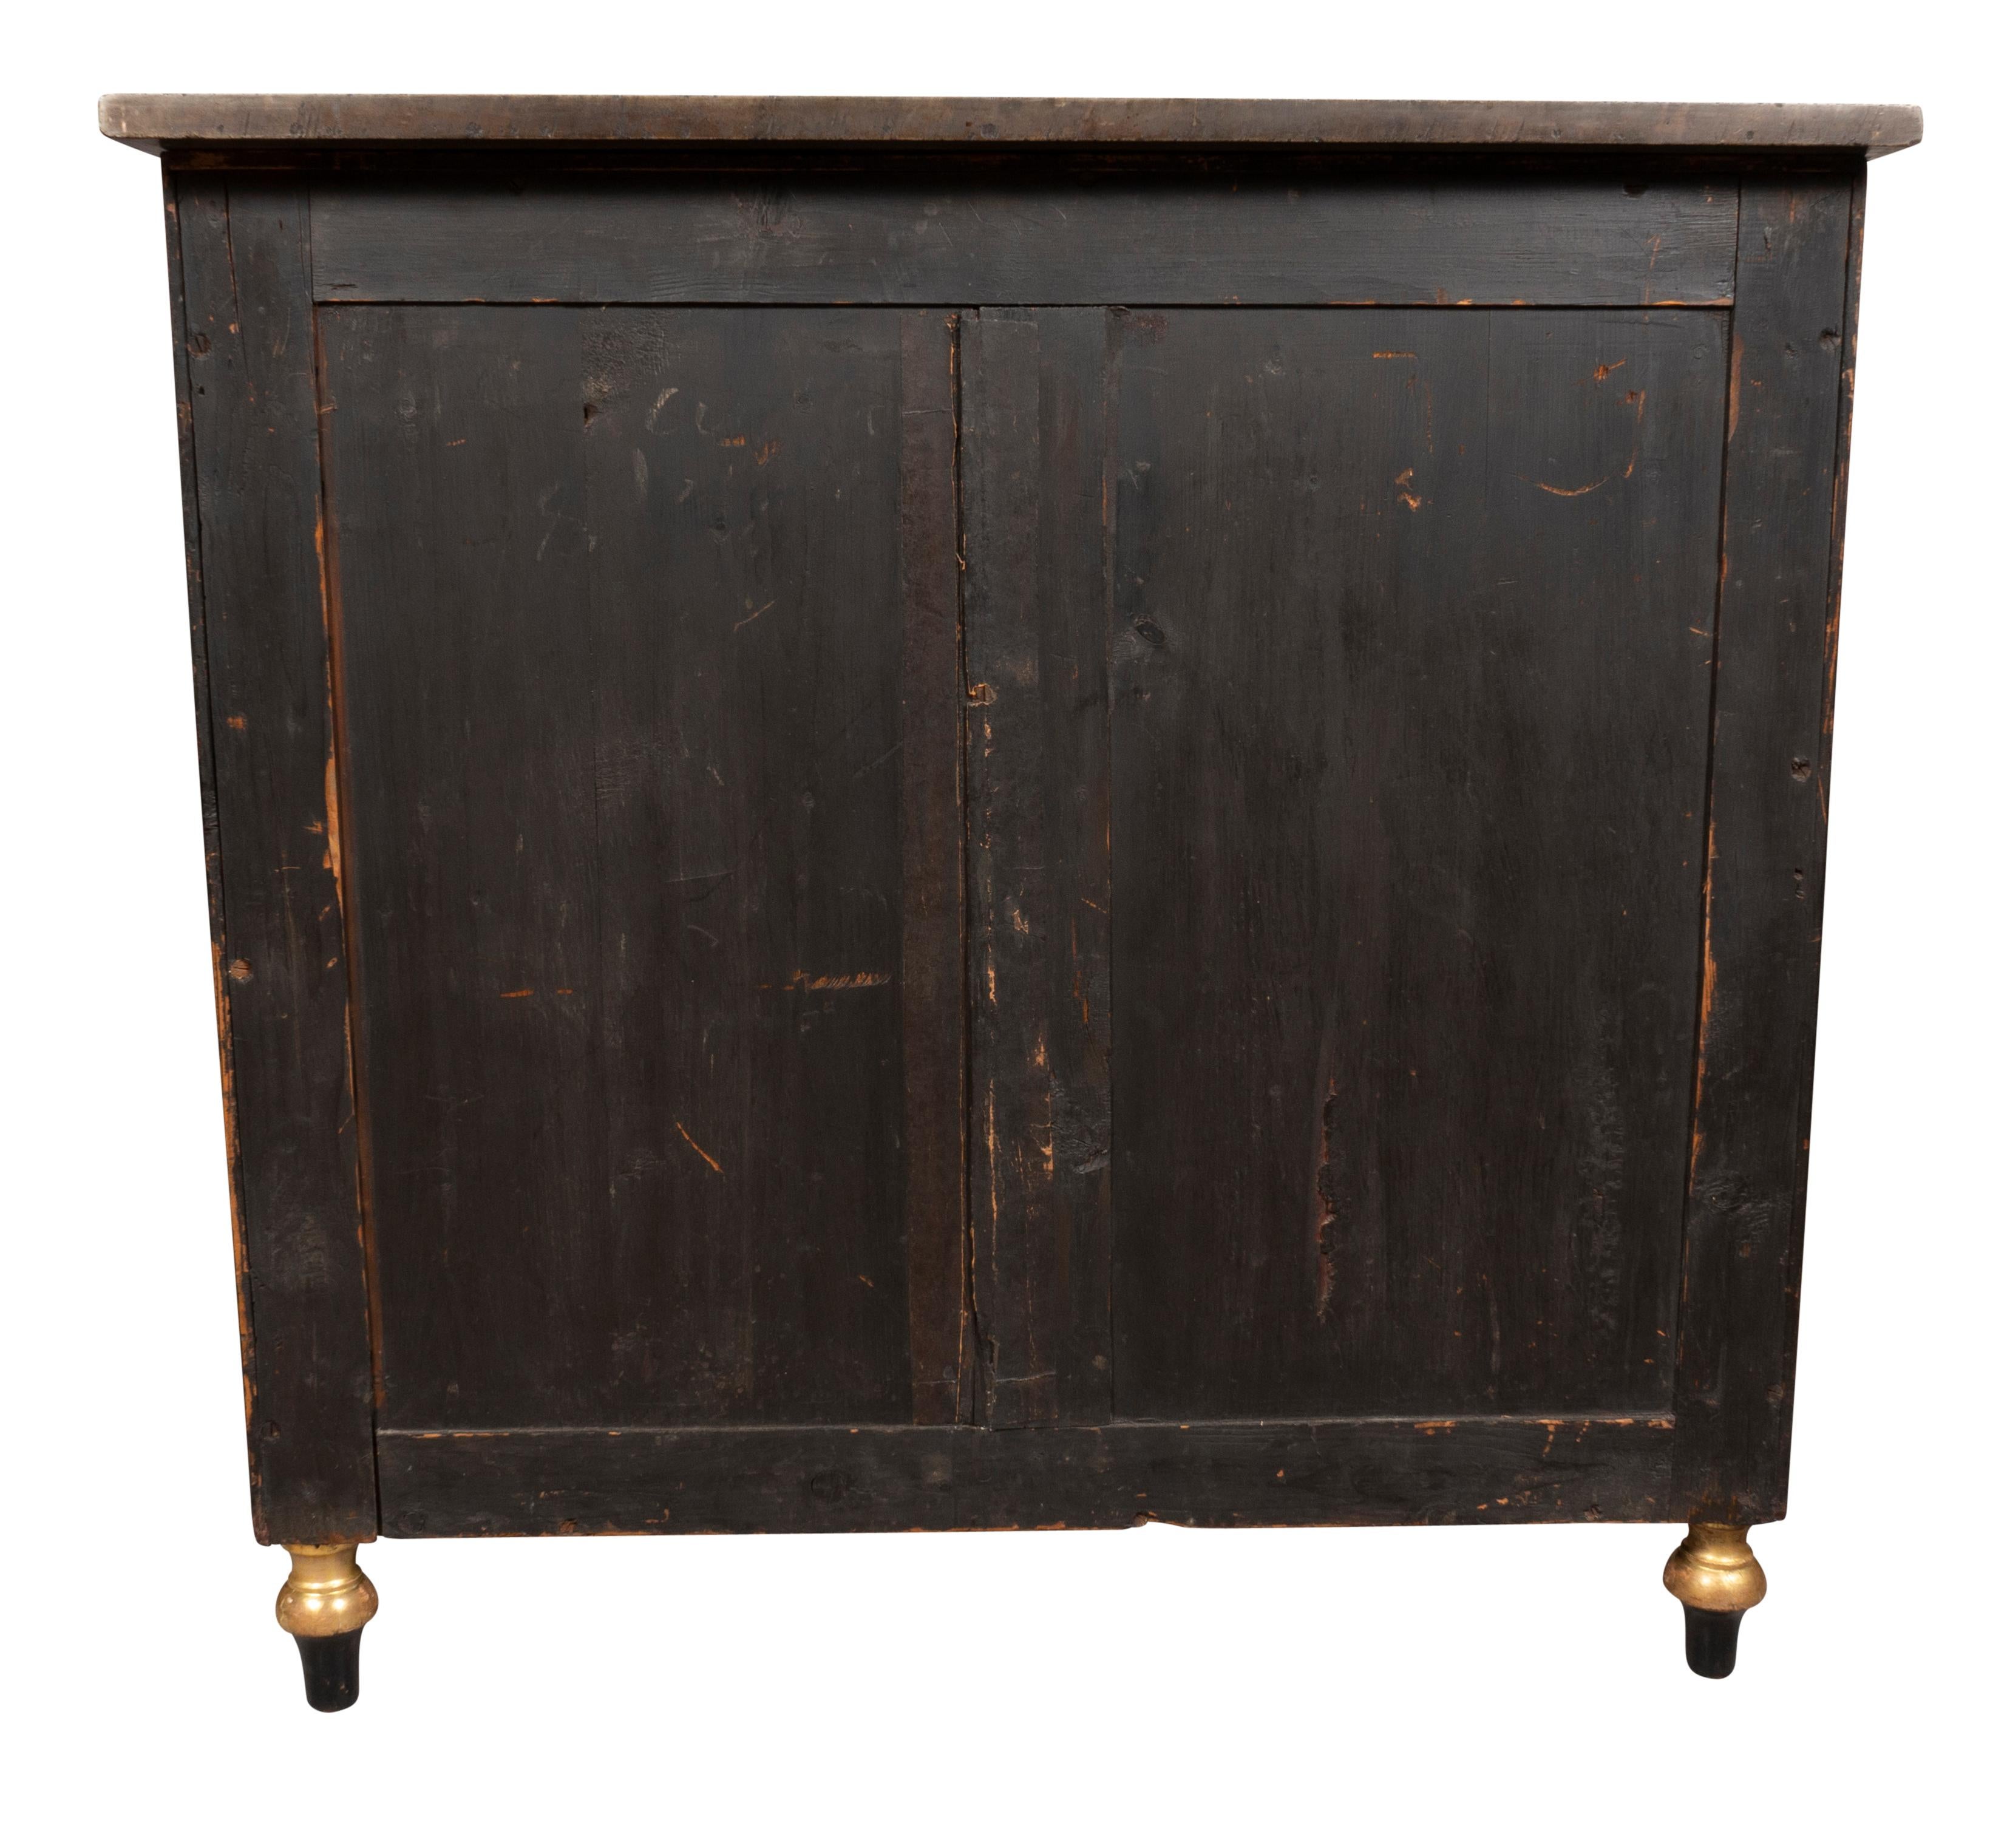 19th Century Regency Rosewood And Brass Mounted Credenza